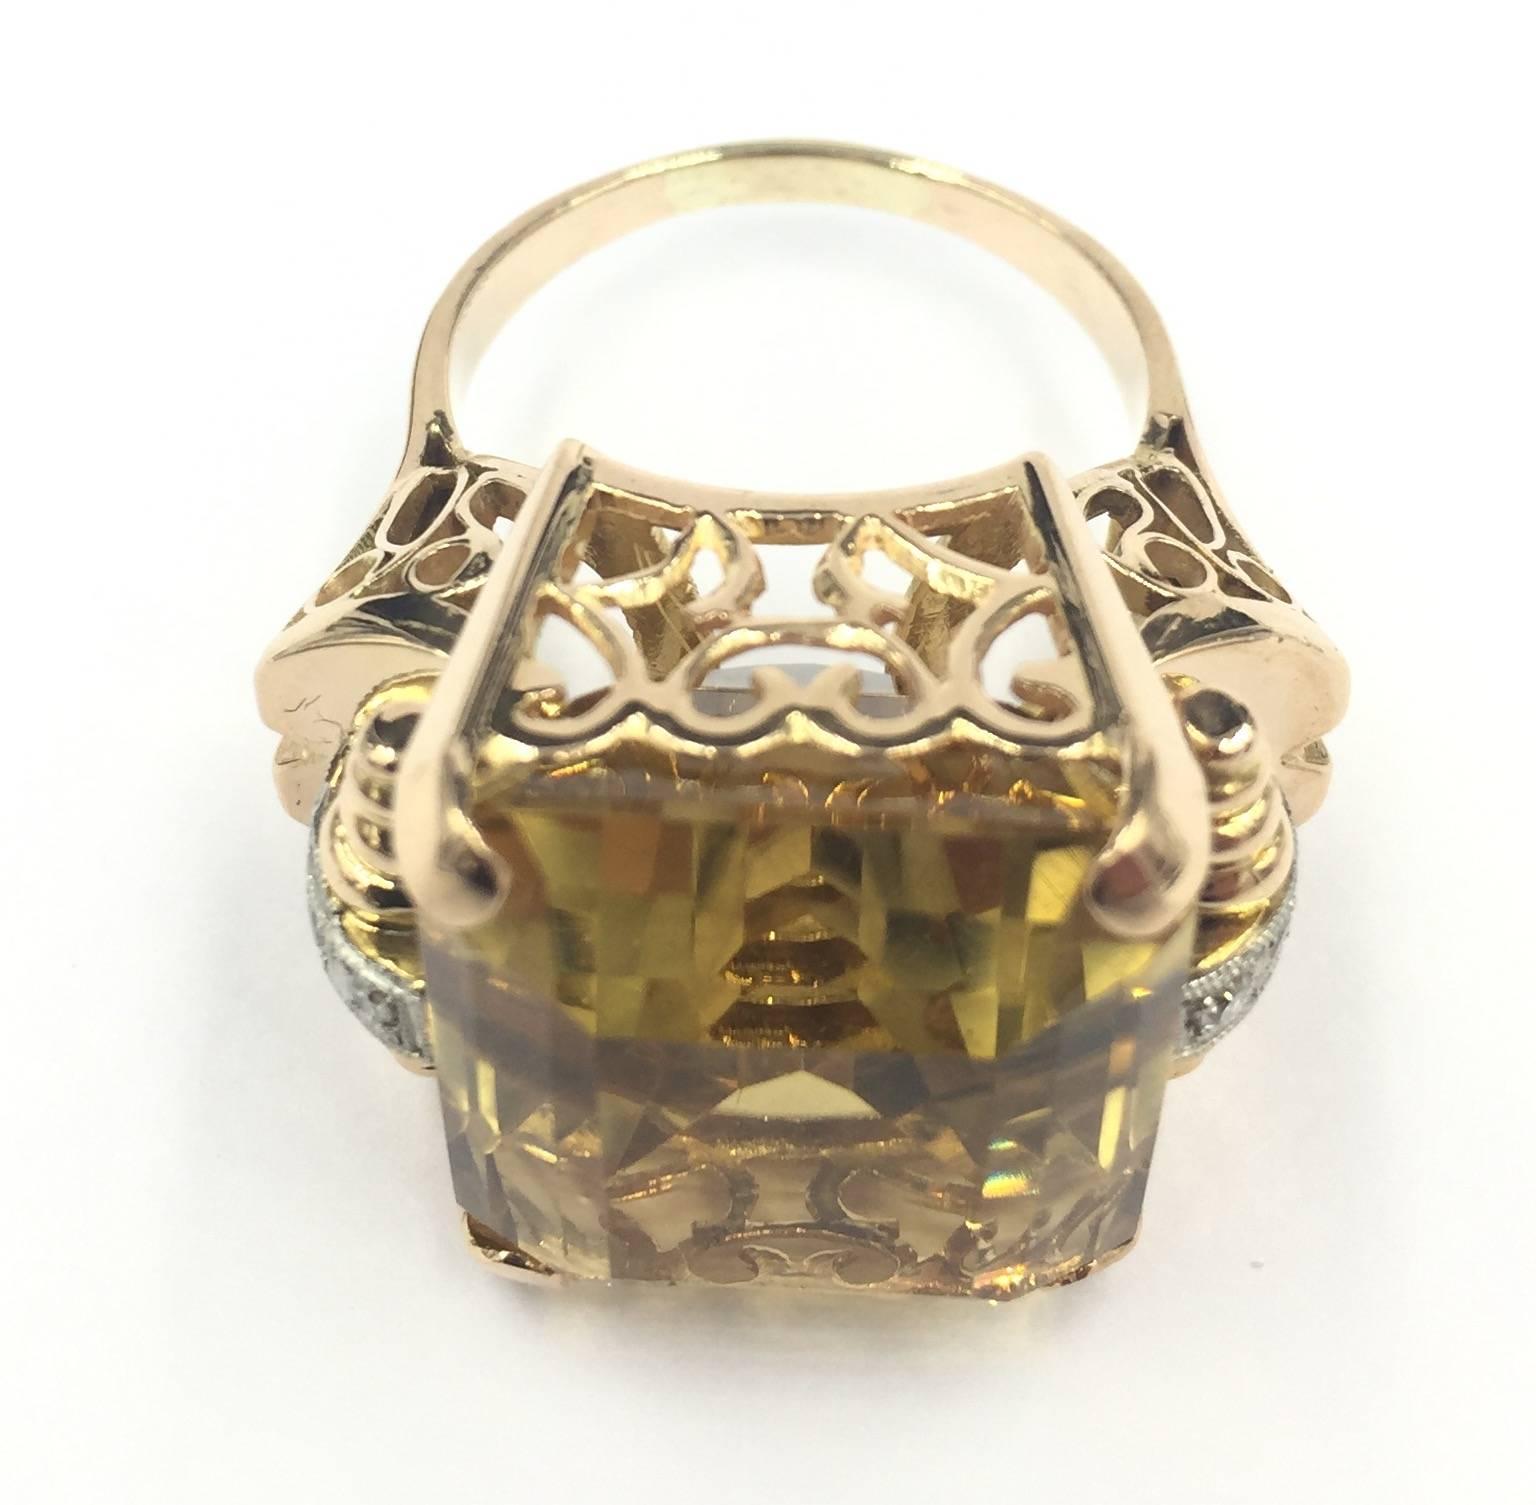 1940's Retro 14kt 22ctw Citrine and .10ctw Diamond Ring 16.7grams

The retro jewelry period lasting from 1935 until 1950 was set against war and economic depression. Nevertheless America's talented handcrafting jewelers produced some of the most